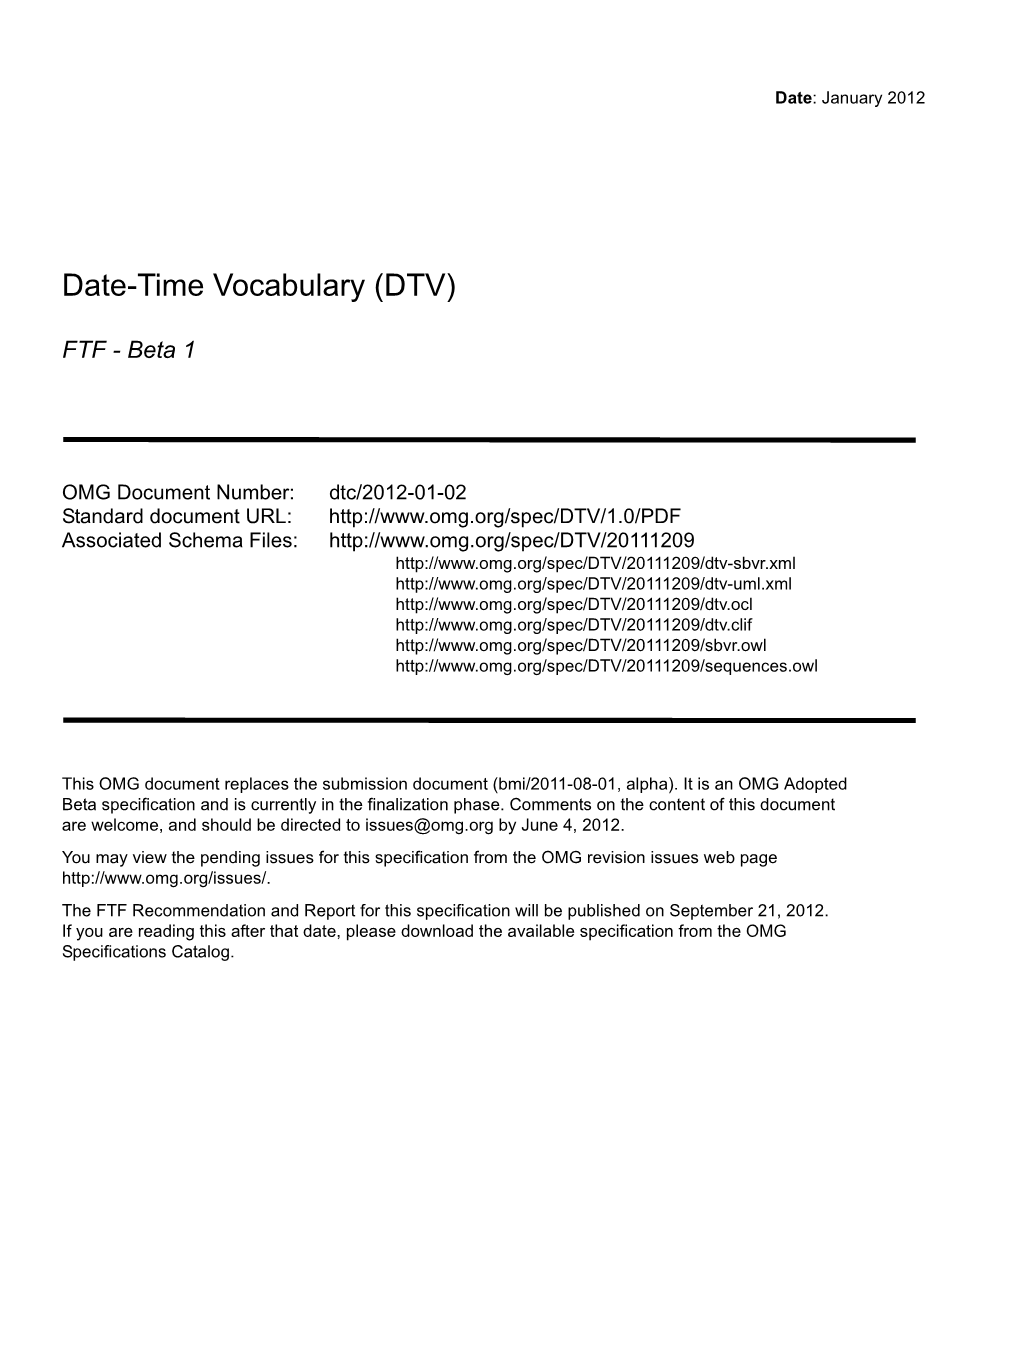 Date-Time Vocabulary (DTV)